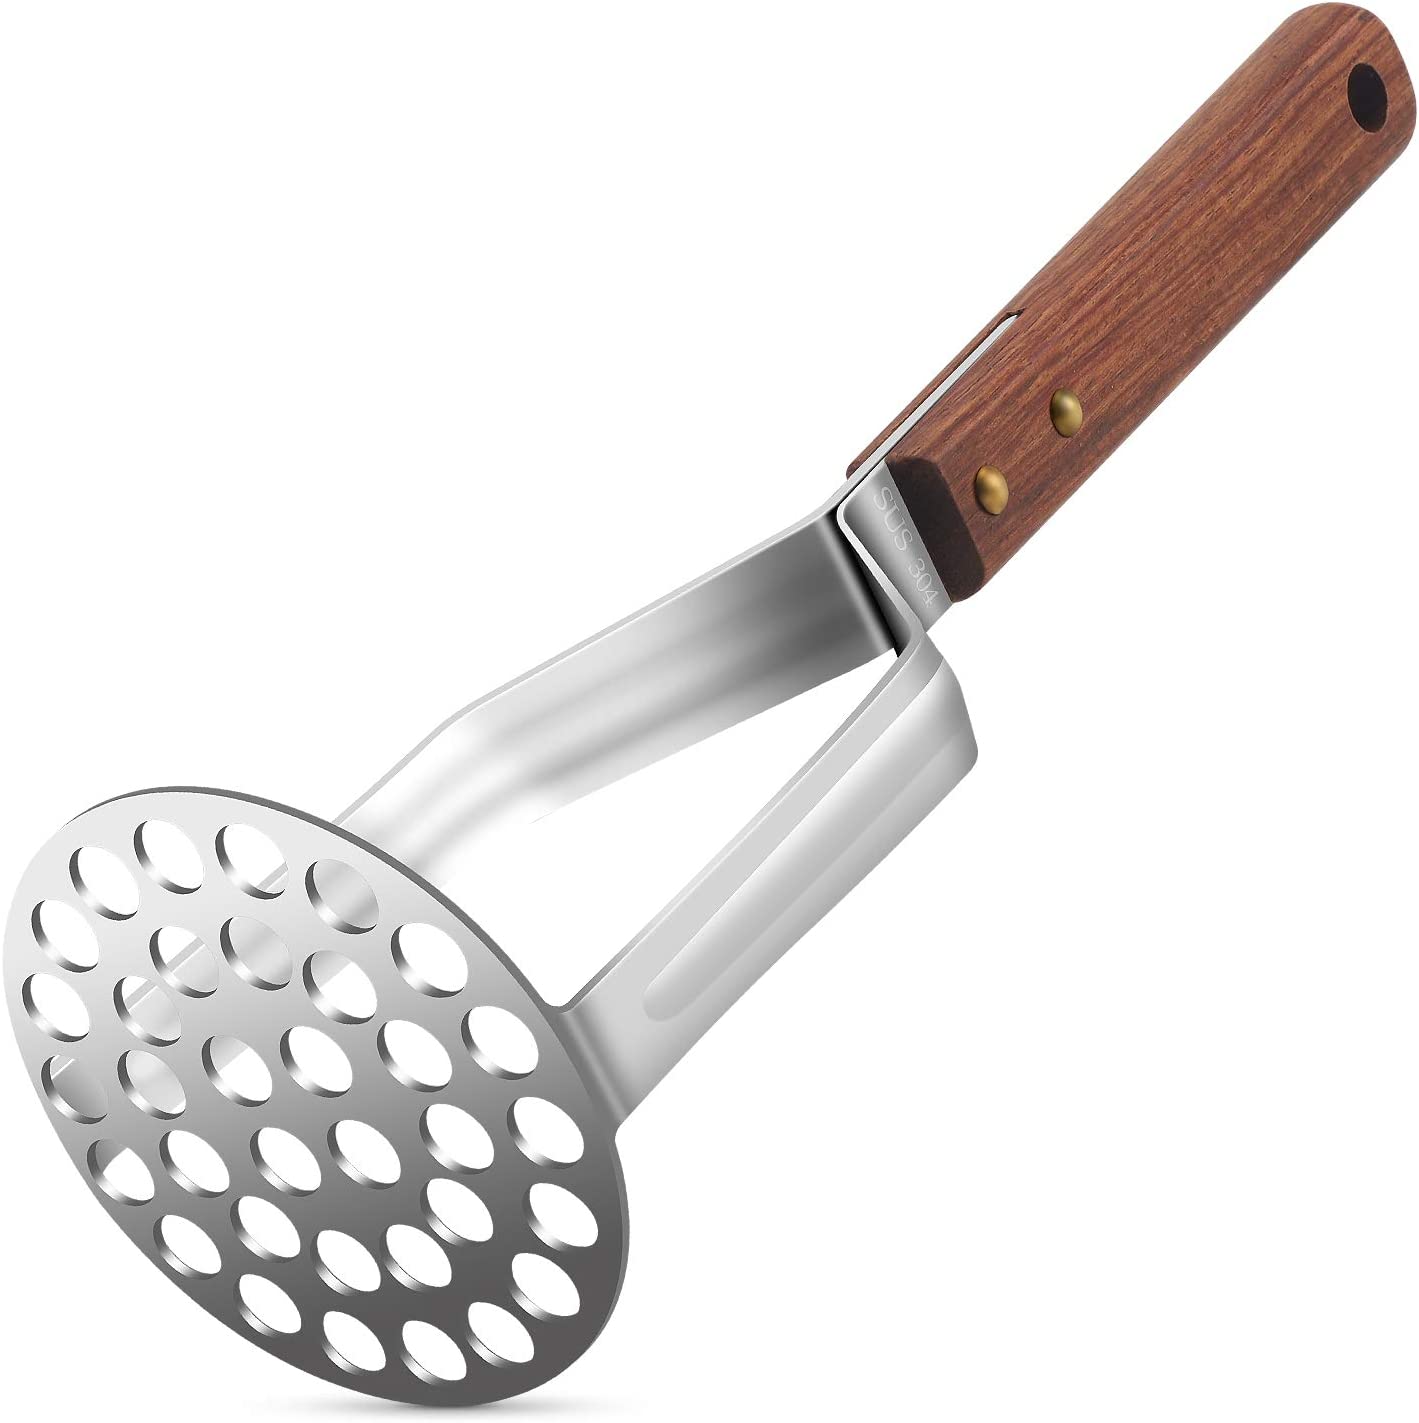 Milvado Stainless Steel Potato Masher - The Peppermill